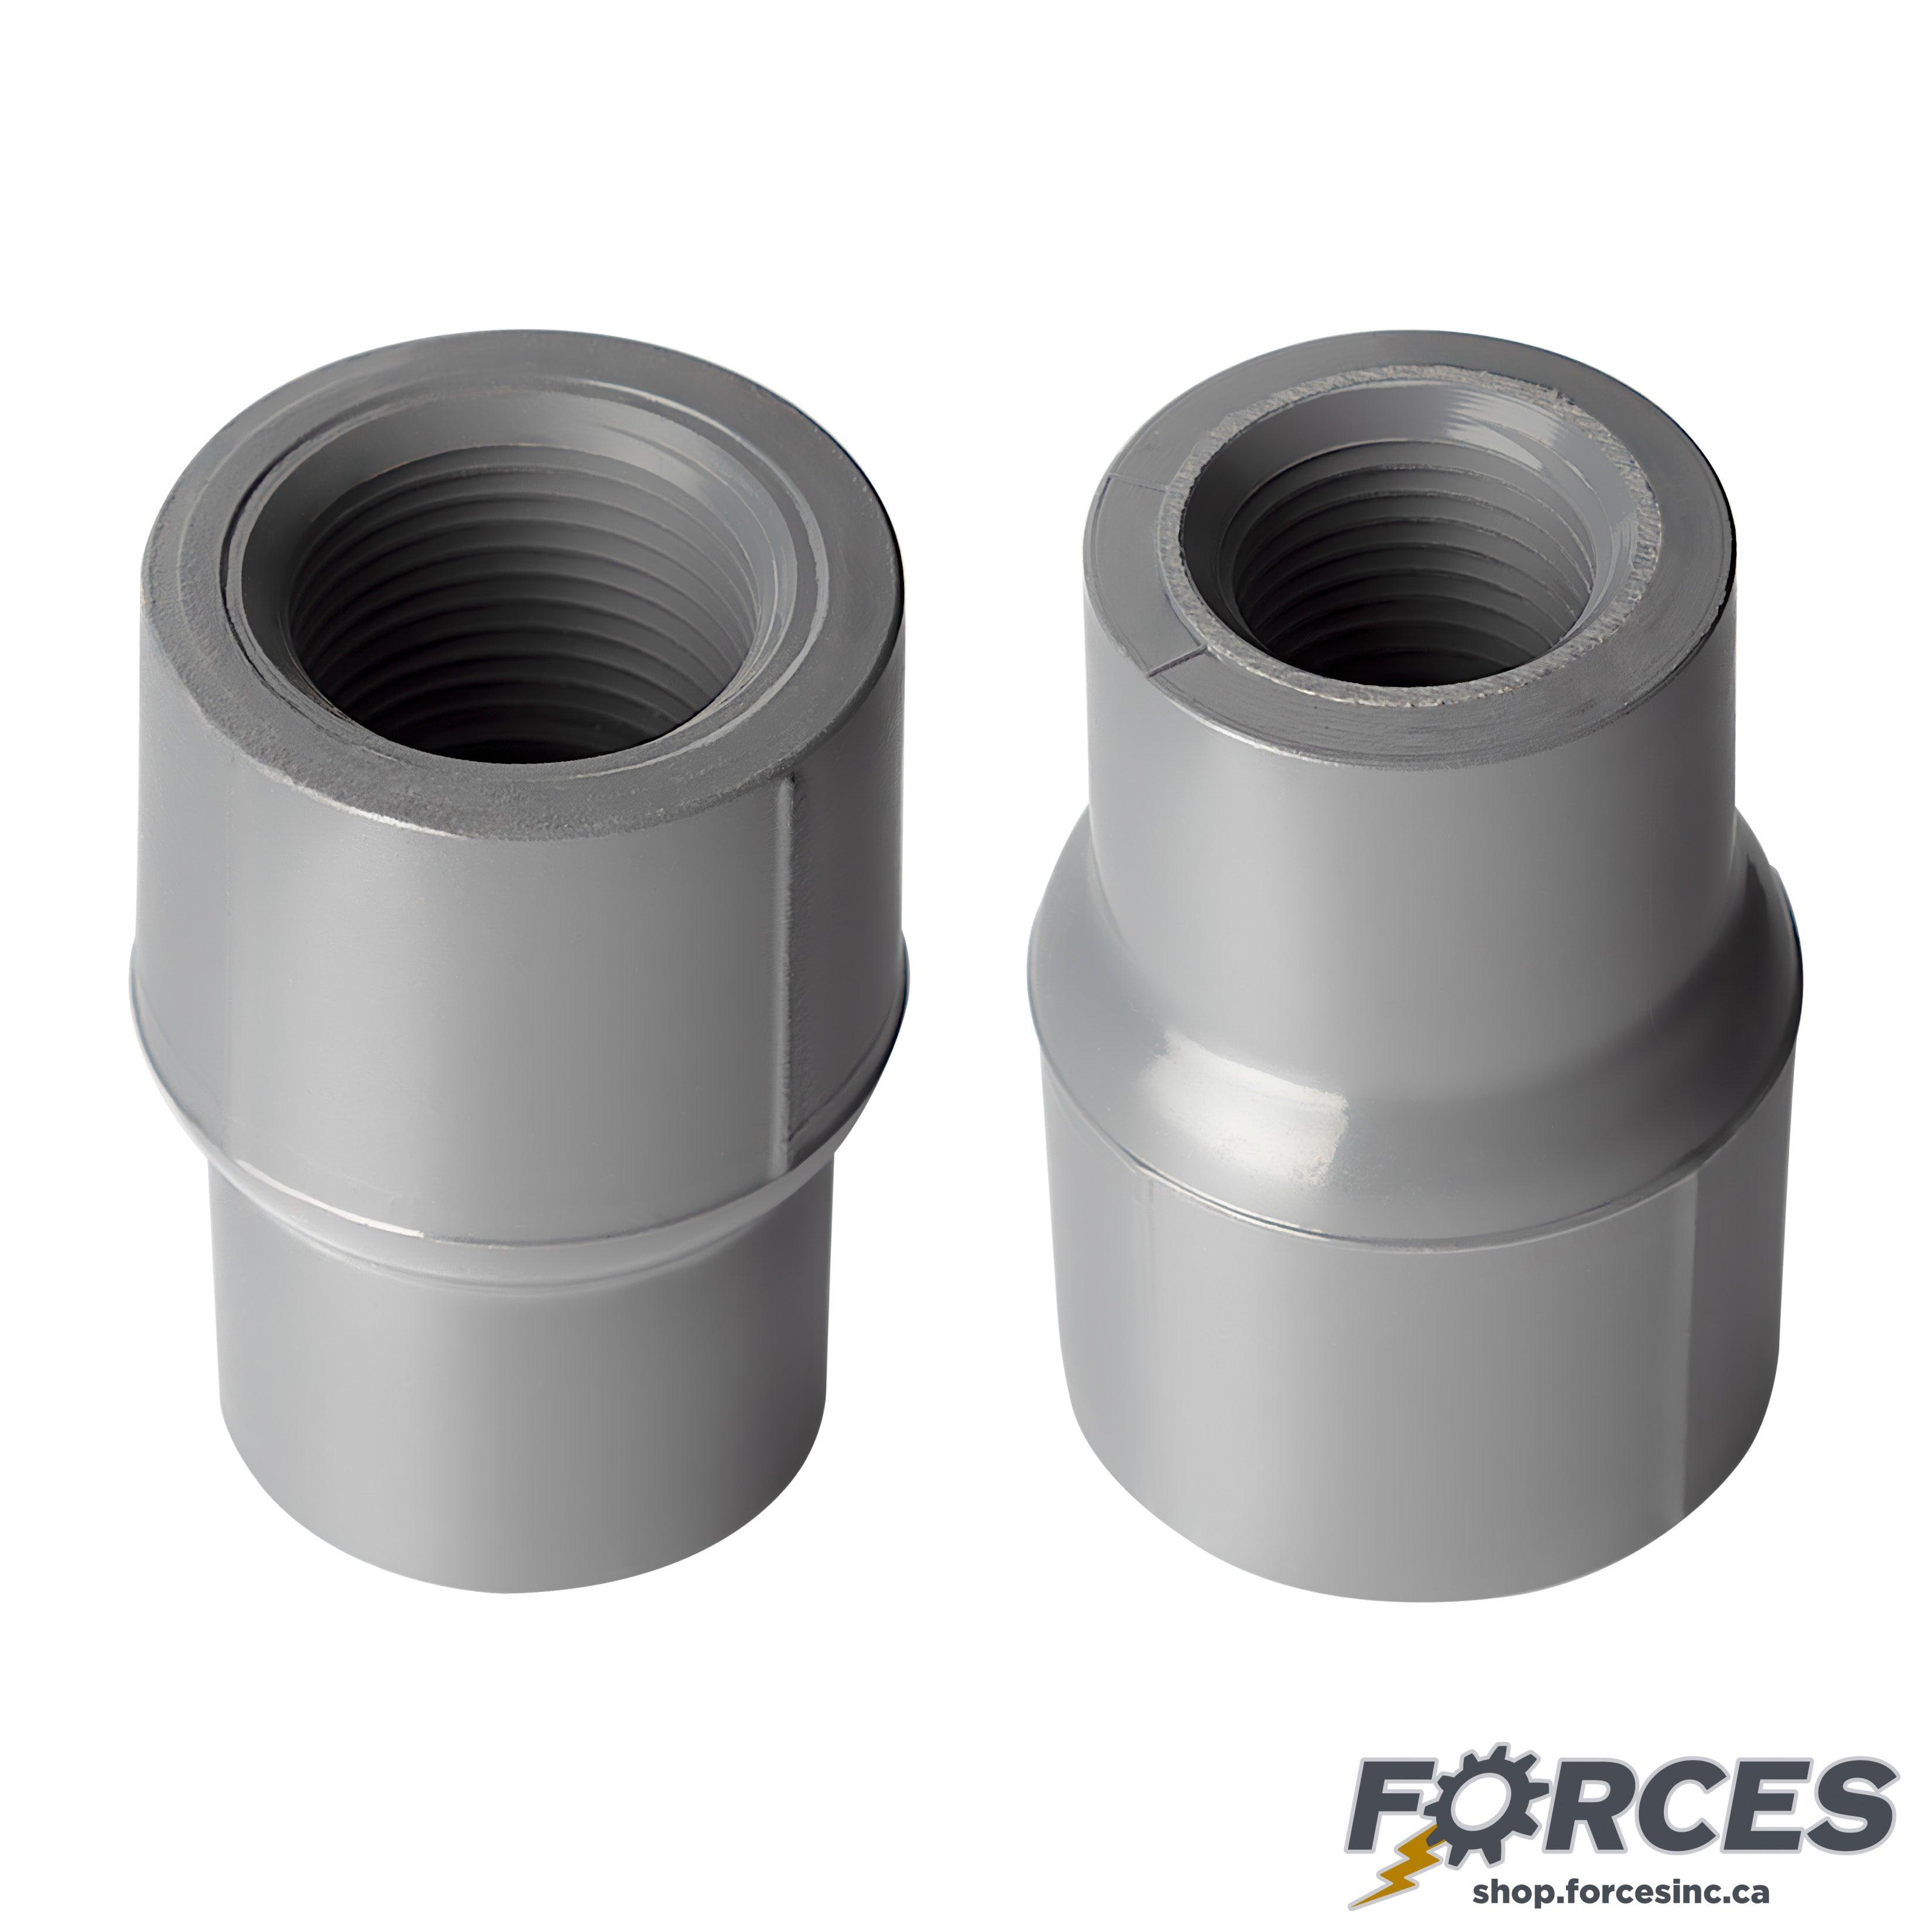 1-1/2" x 1" Reducing Coupling (Threaded) Sch 80 - PVC Grey | 830211 - Forces Inc